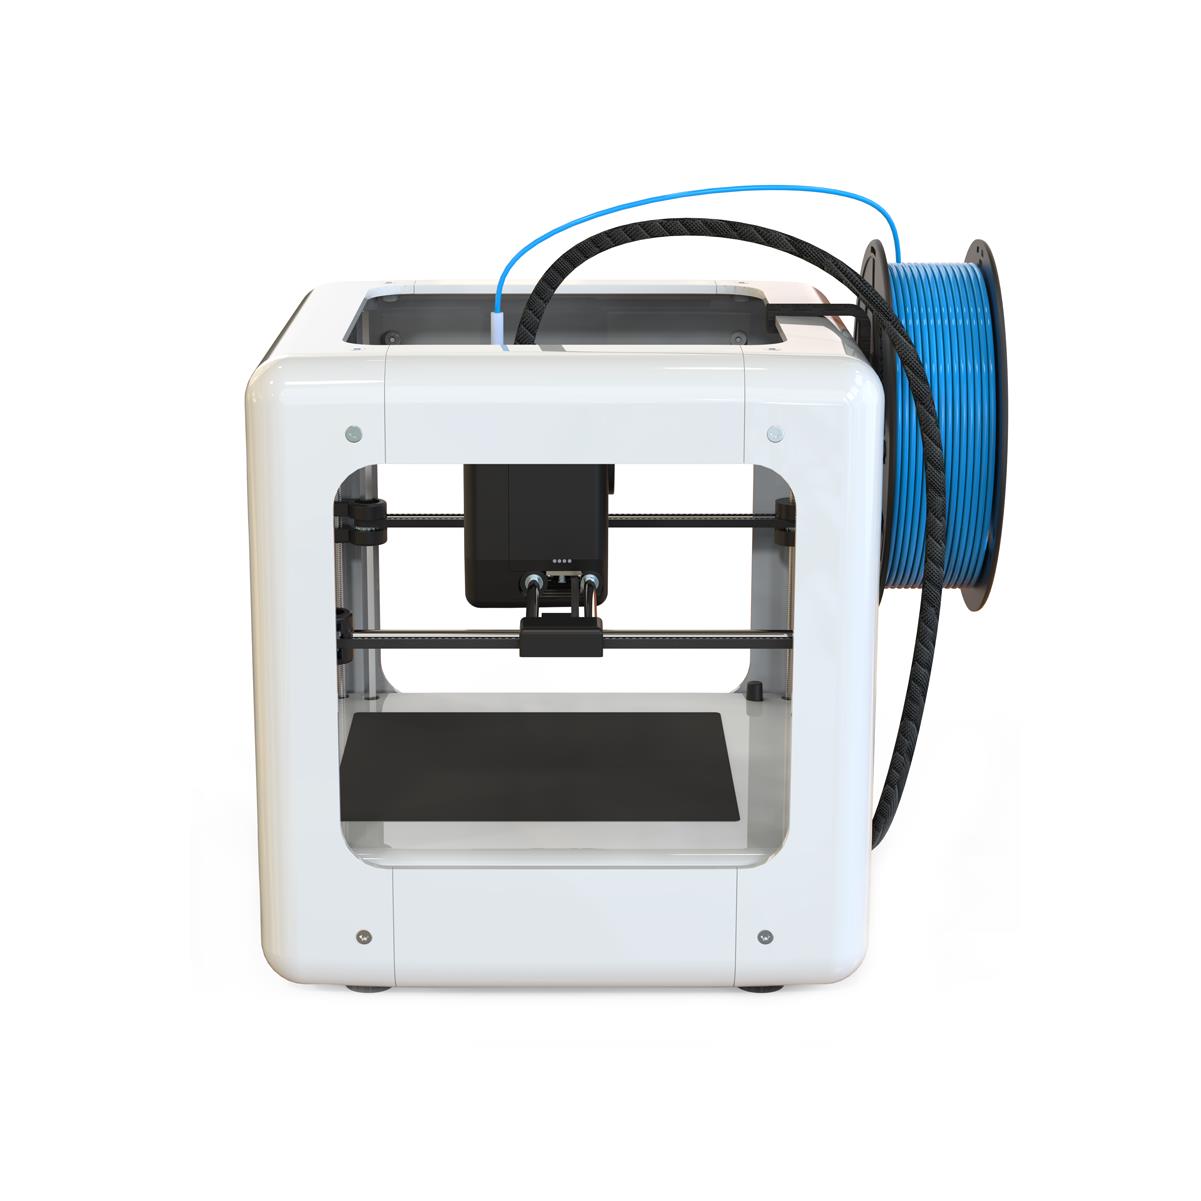 Easythreed® NANO Mini Fully Assembled 3D Printer for Household Education & Students 90*110*110mm Printing Size Support One Key Printing with 1.75m 41